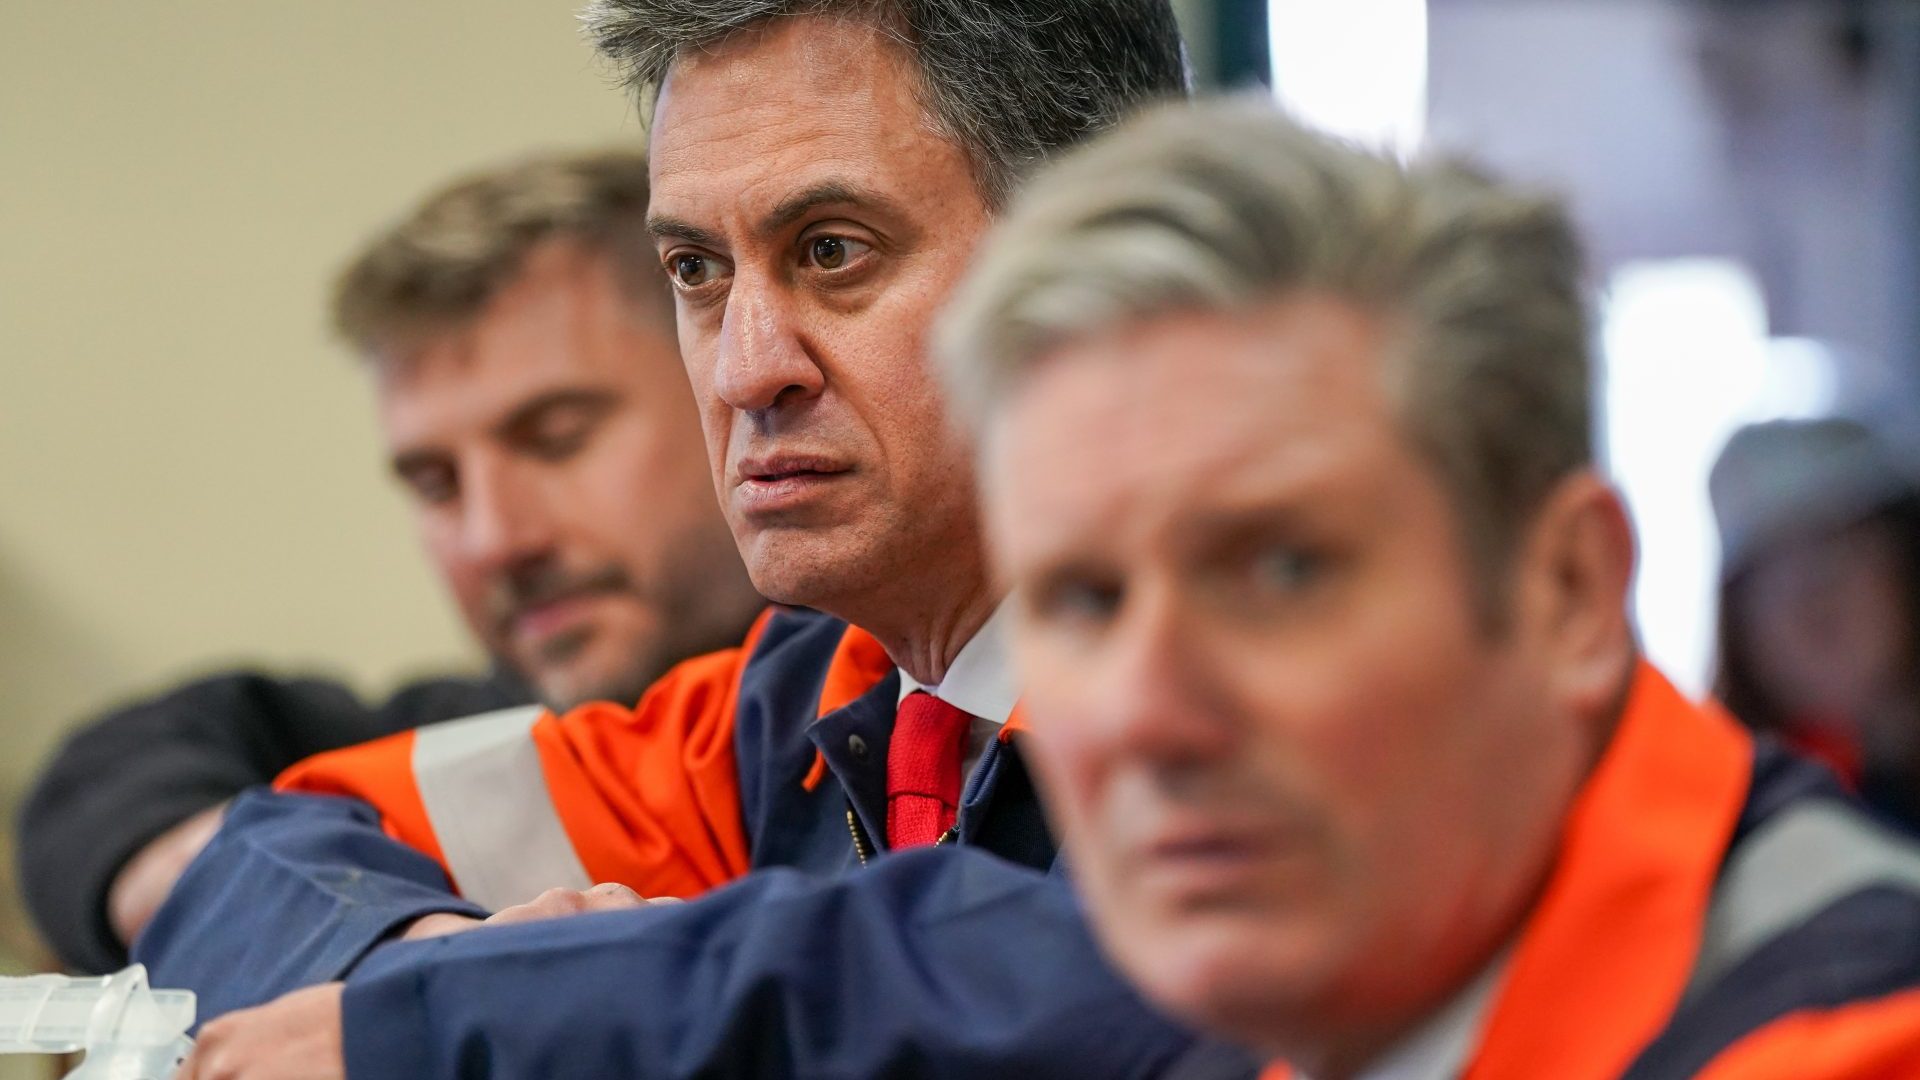 Keir Starmer and shadow climate change secretary Ed Miliband visit the British Steel manufacturing site in North Lincolnshire (Photo by Ian Forsyth/Getty Images)